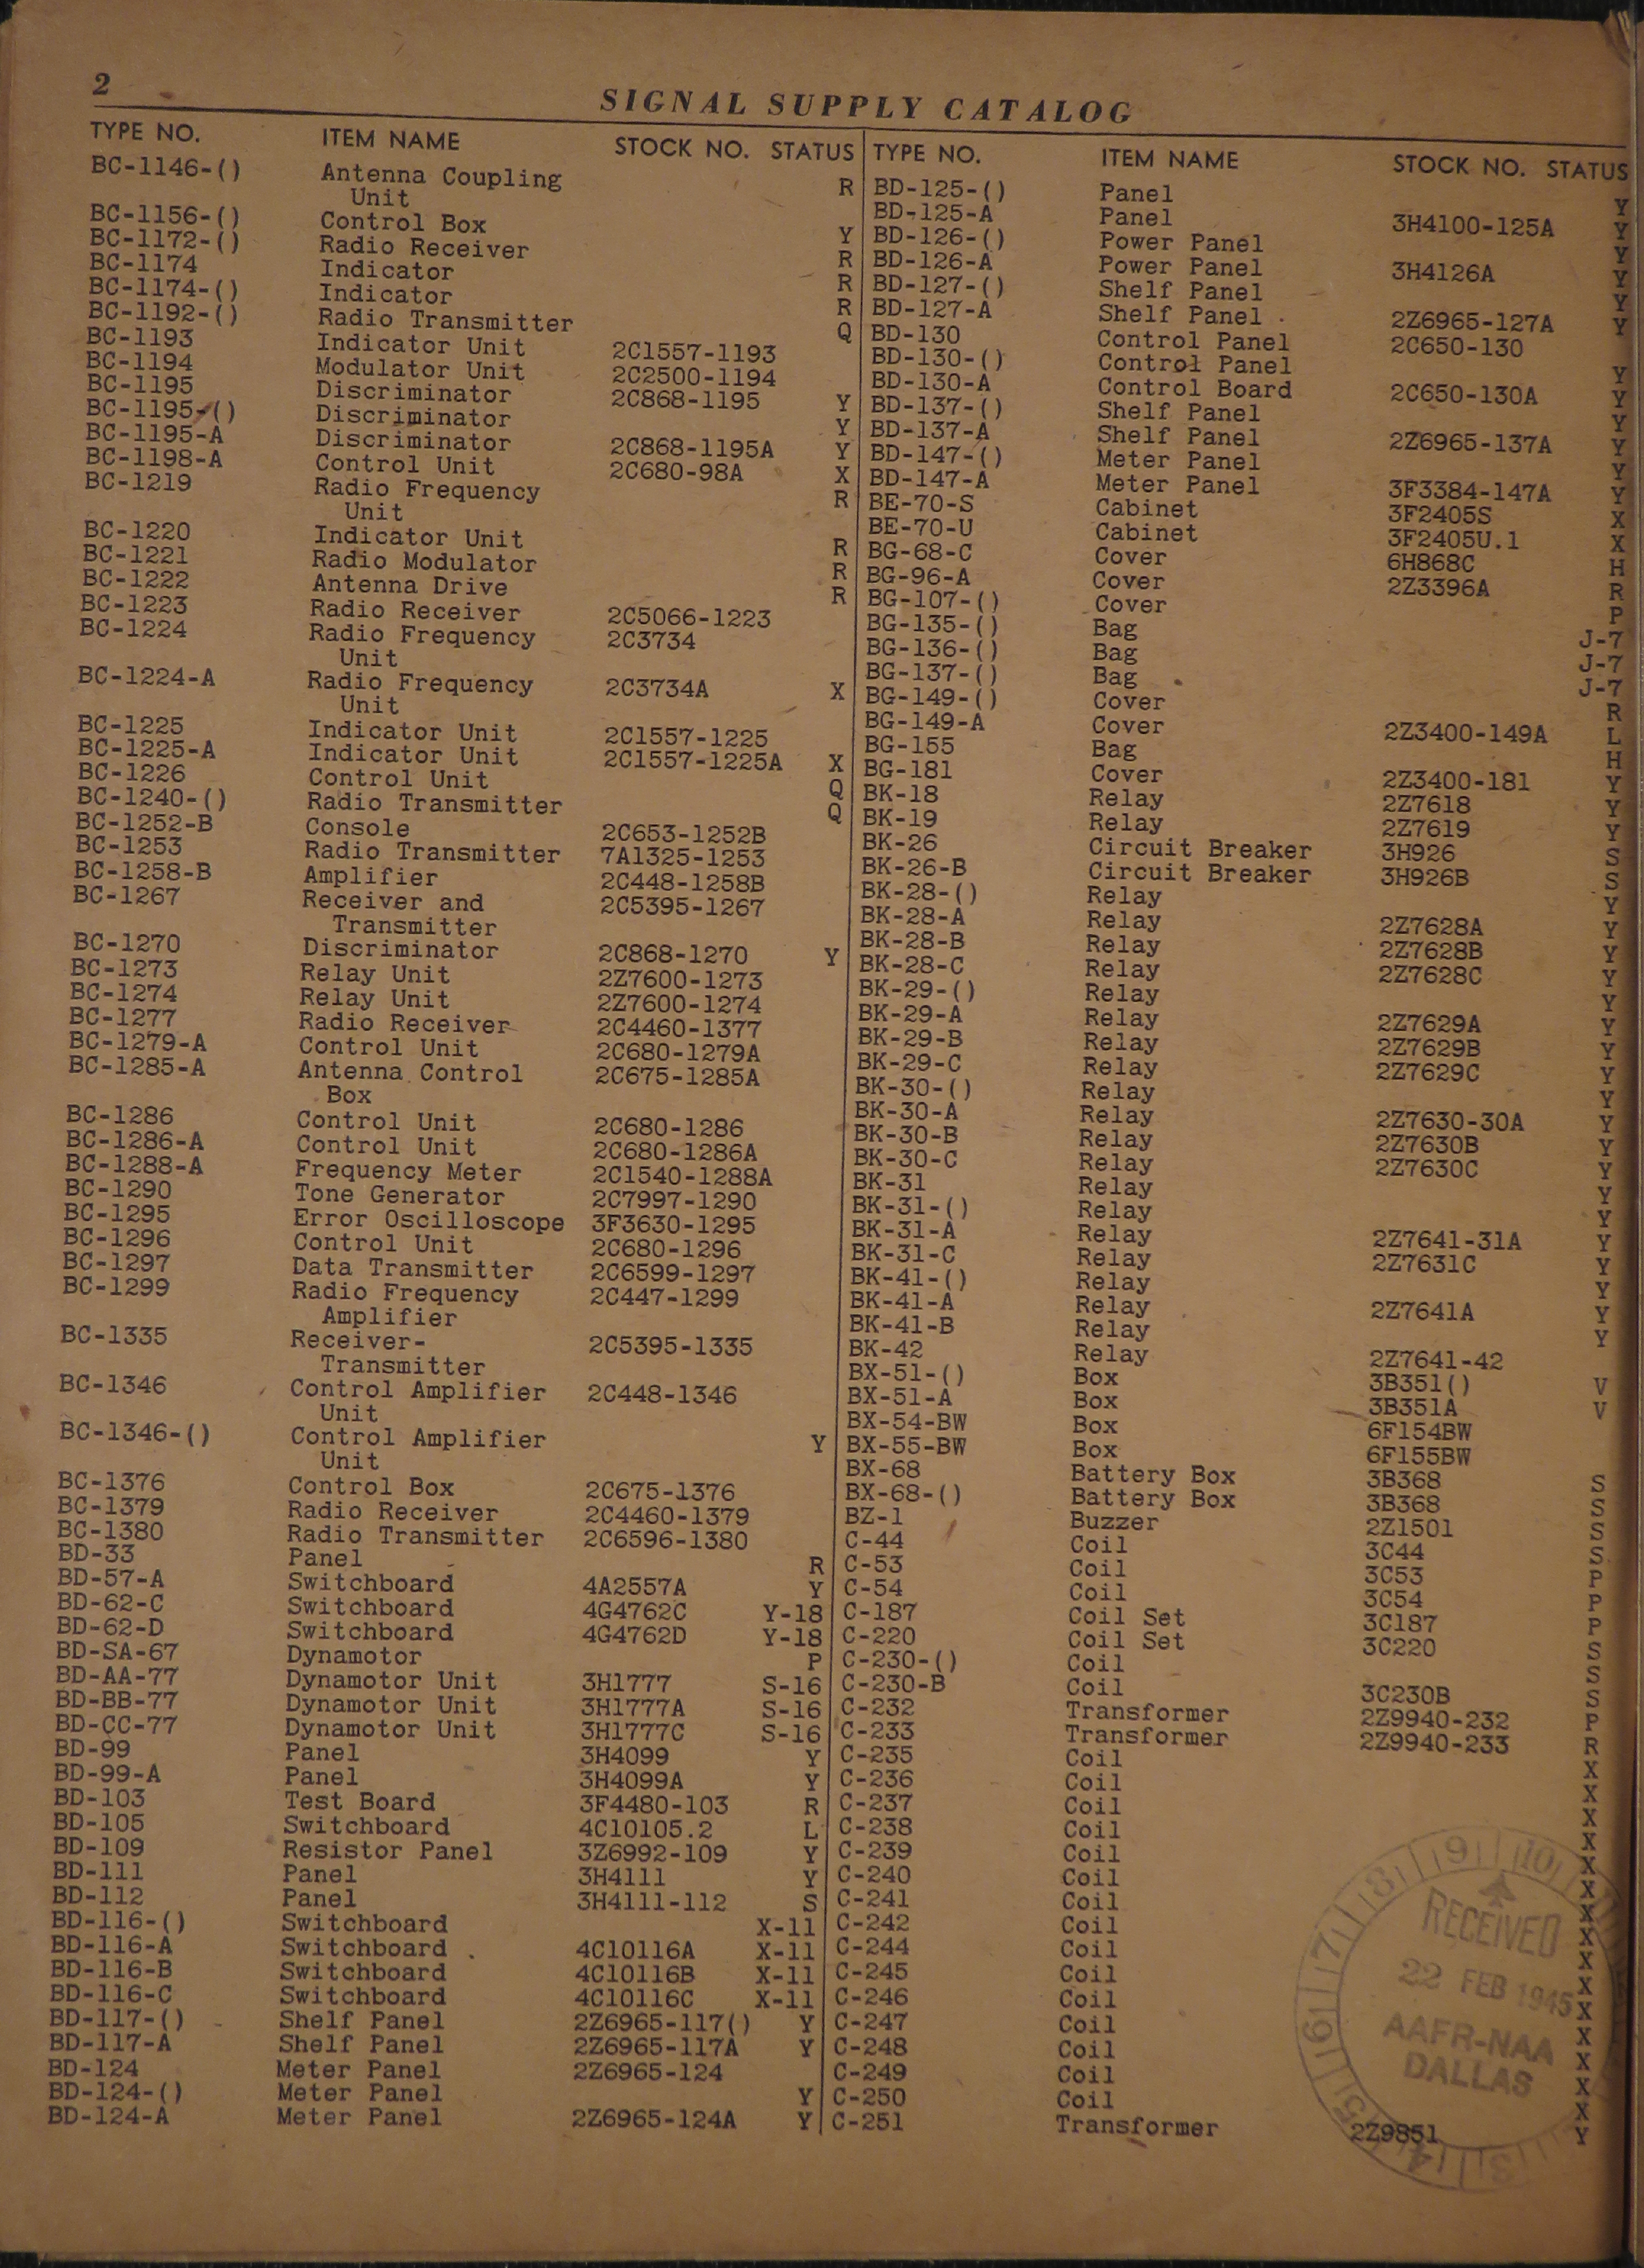 Sample page 6 from AirCorps Library document: Army Air Forces Signal Supply Catalog Index by Type Numbers